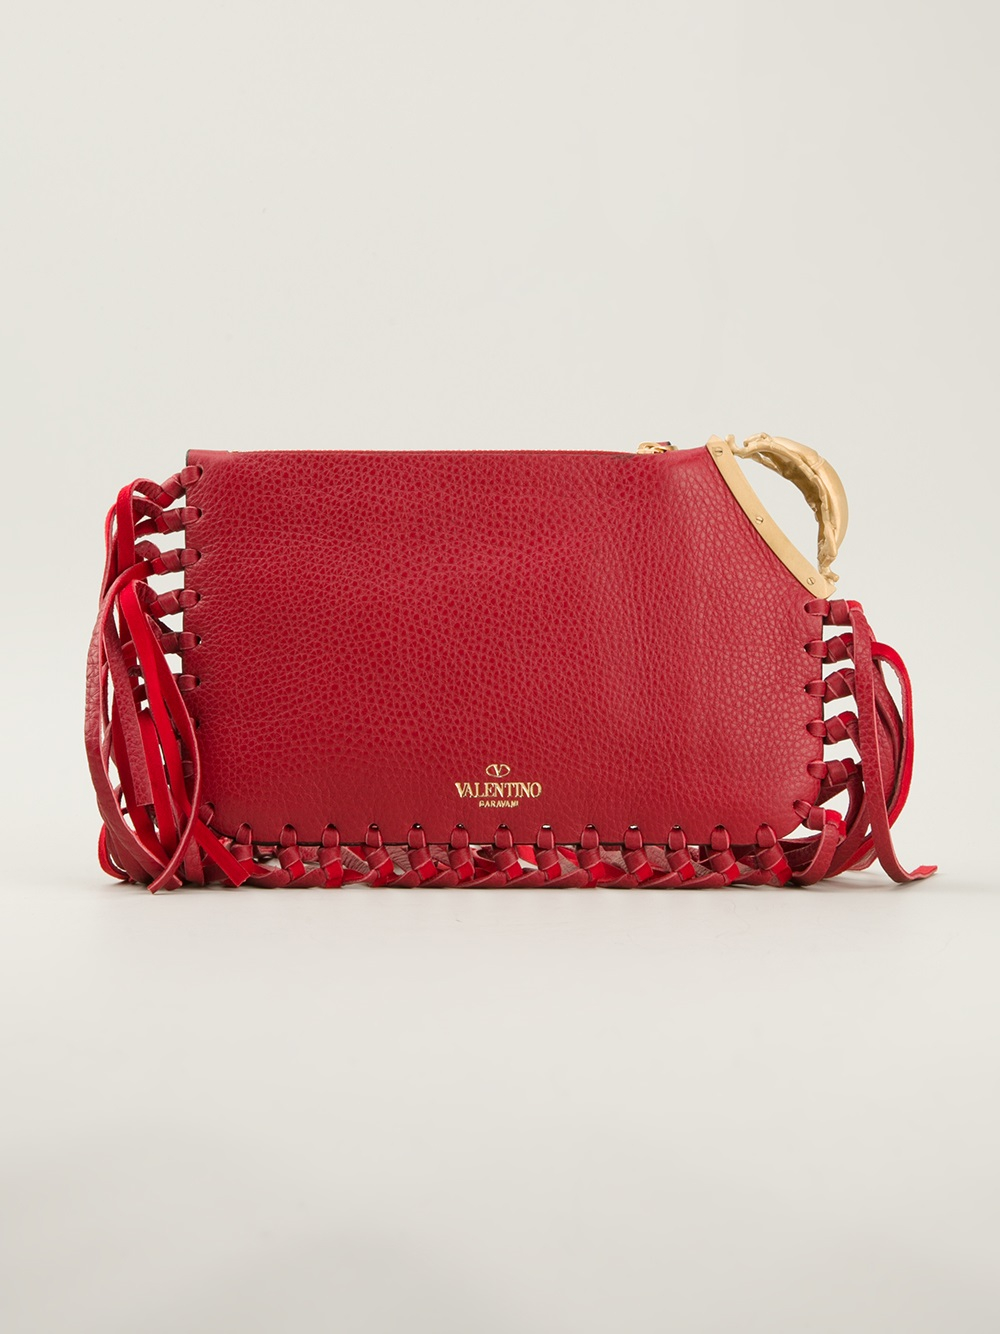 Lyst - Valentino Fringed Clutch in Red